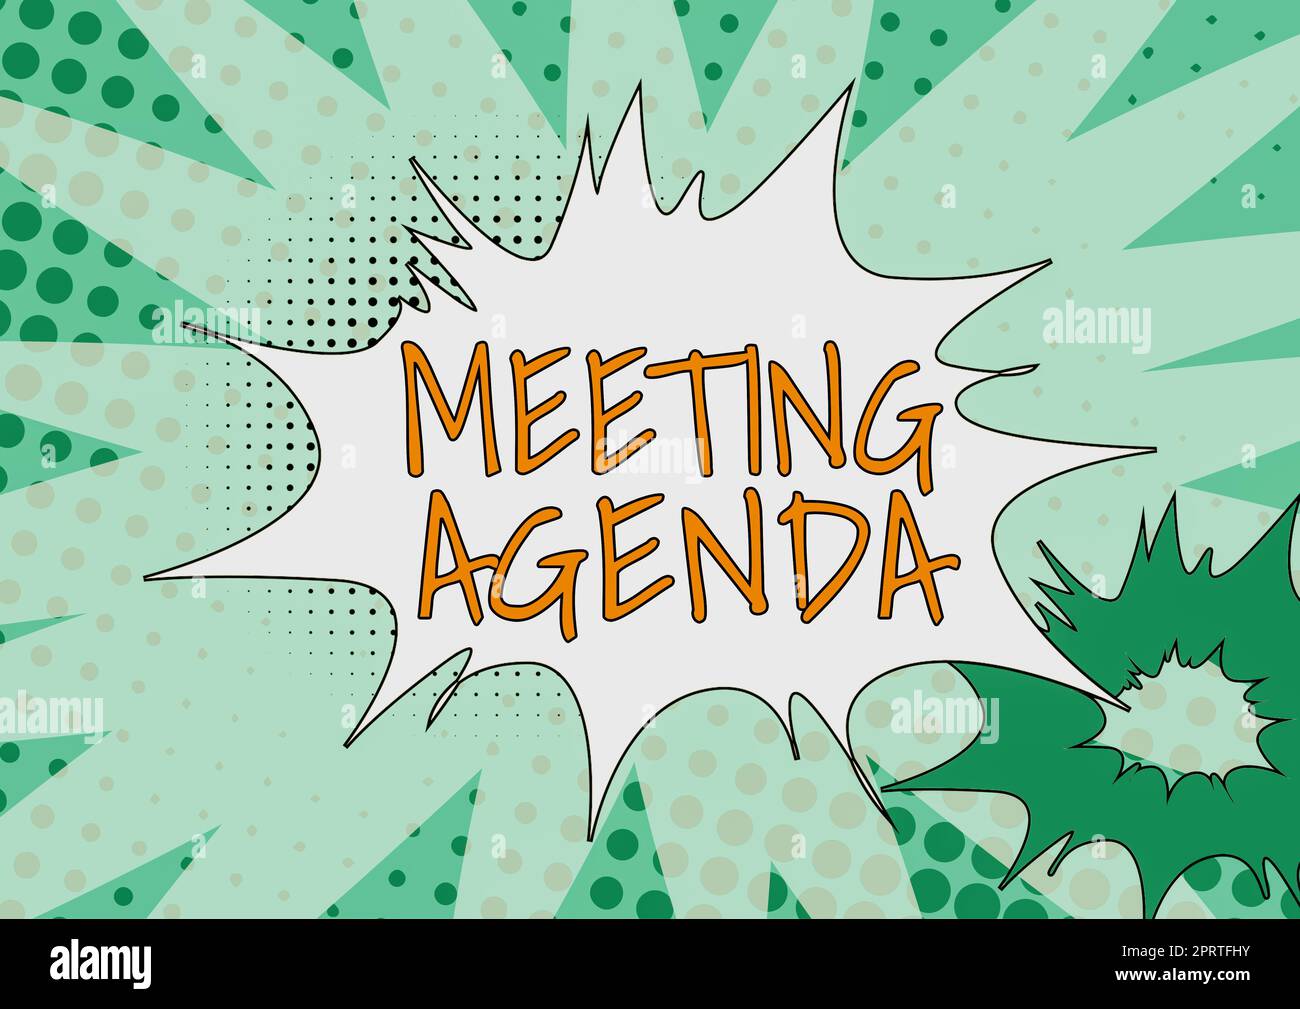 Text caption presenting Meeting AgendaAn agenda sets clear expectations for what needs to a meeting. Internet Concept An agenda sets clear expectations for what needs to a meeting Stock Photo